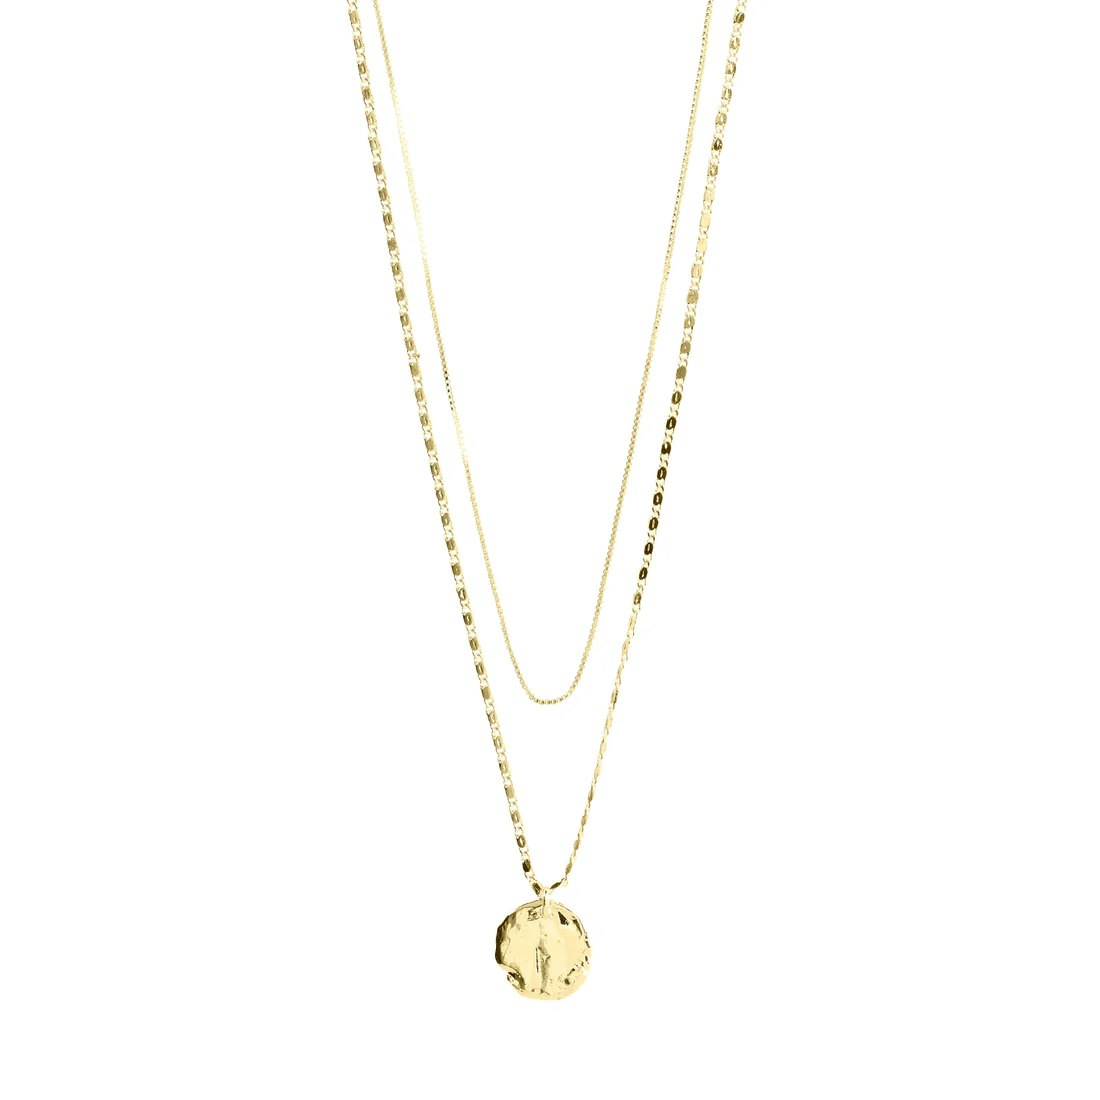 MSF Recycled Coin Necklace 2-in-1 set Gold Pilgrim